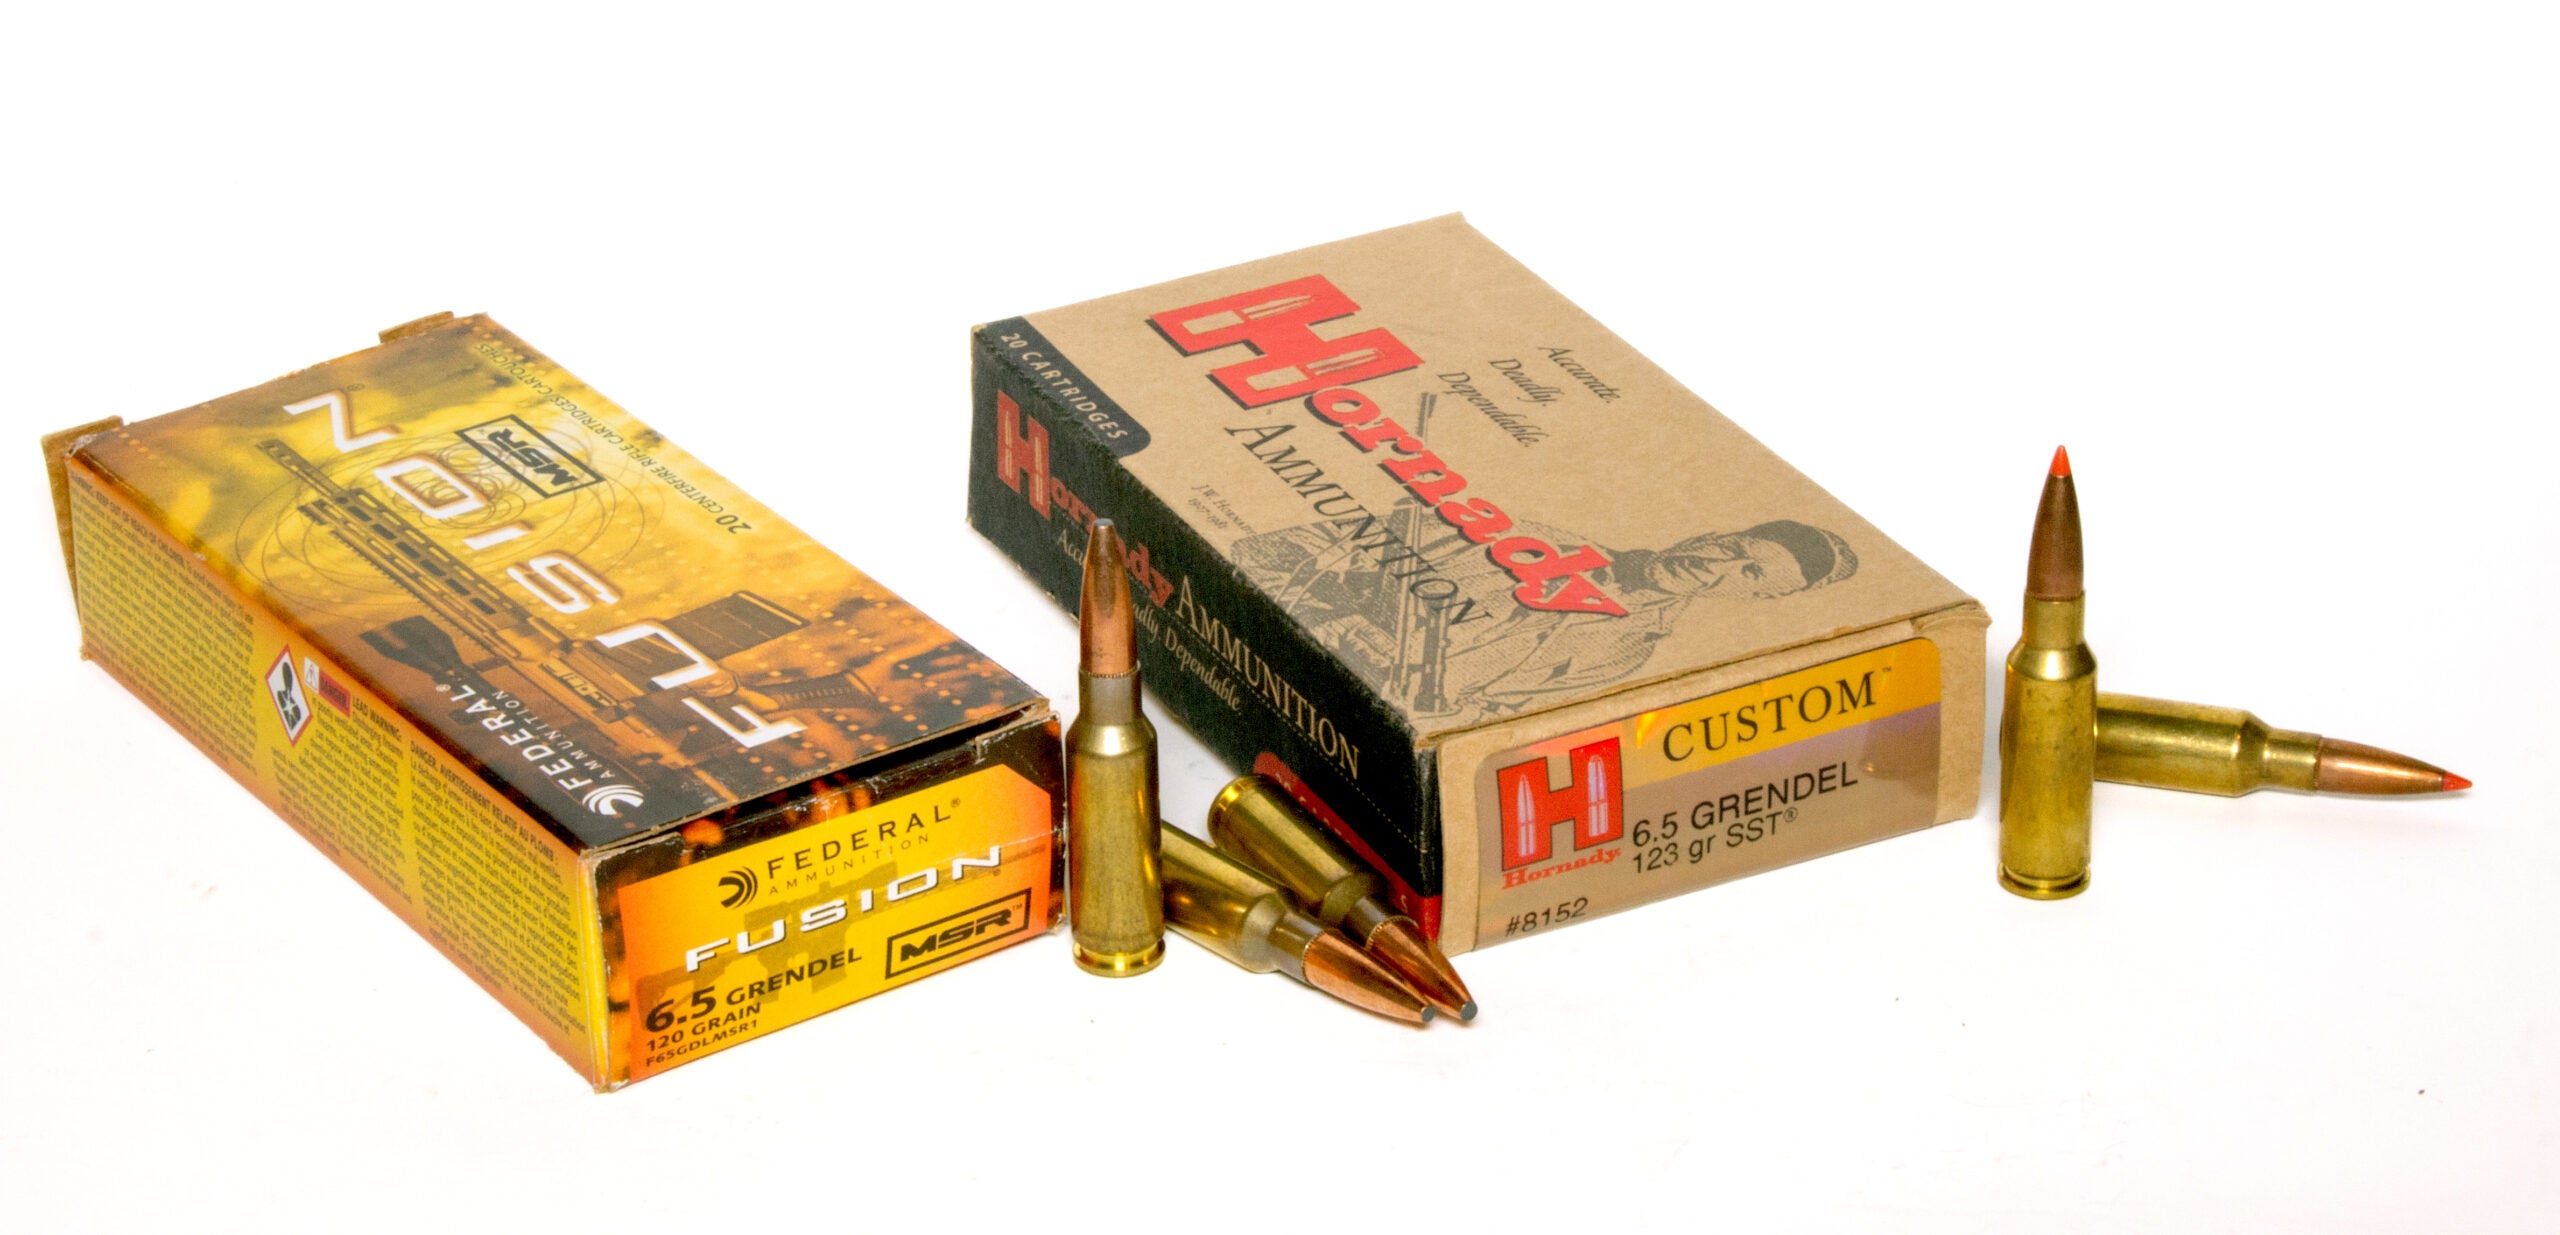 Two boxes of 6.5 Grendel ammo, plus several loose cartridges on a white background